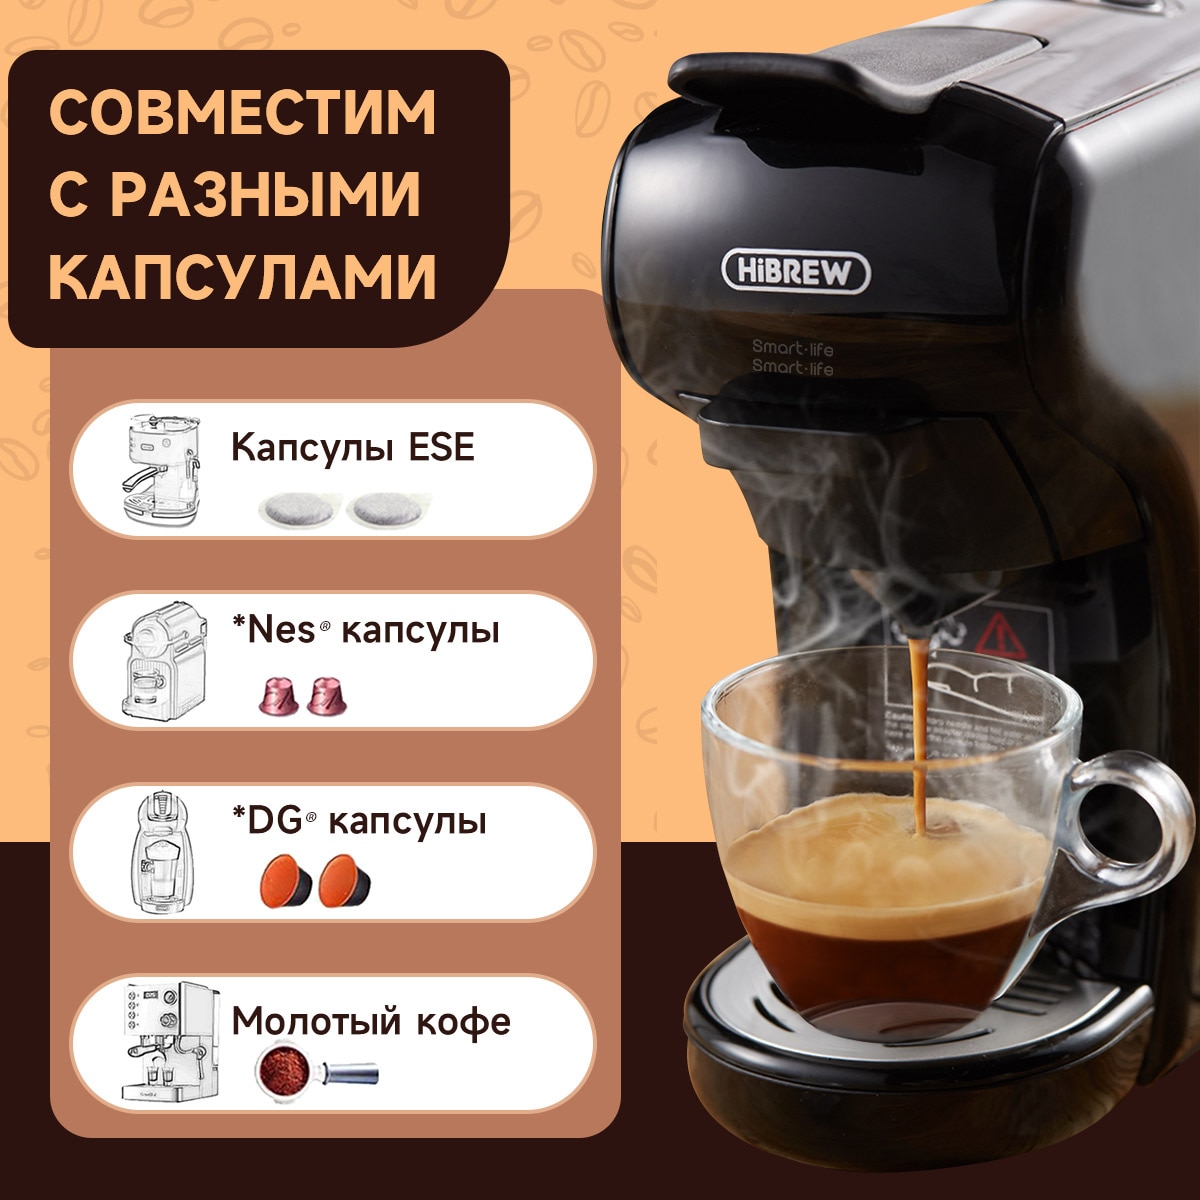 Coffee Machine Multiple Capsule Expresso Cafetera Dolce Milk And Nexpresso  Capsule Esepod Ground Coffee For Home Party And Cof - Coffee Makers -  AliExpress